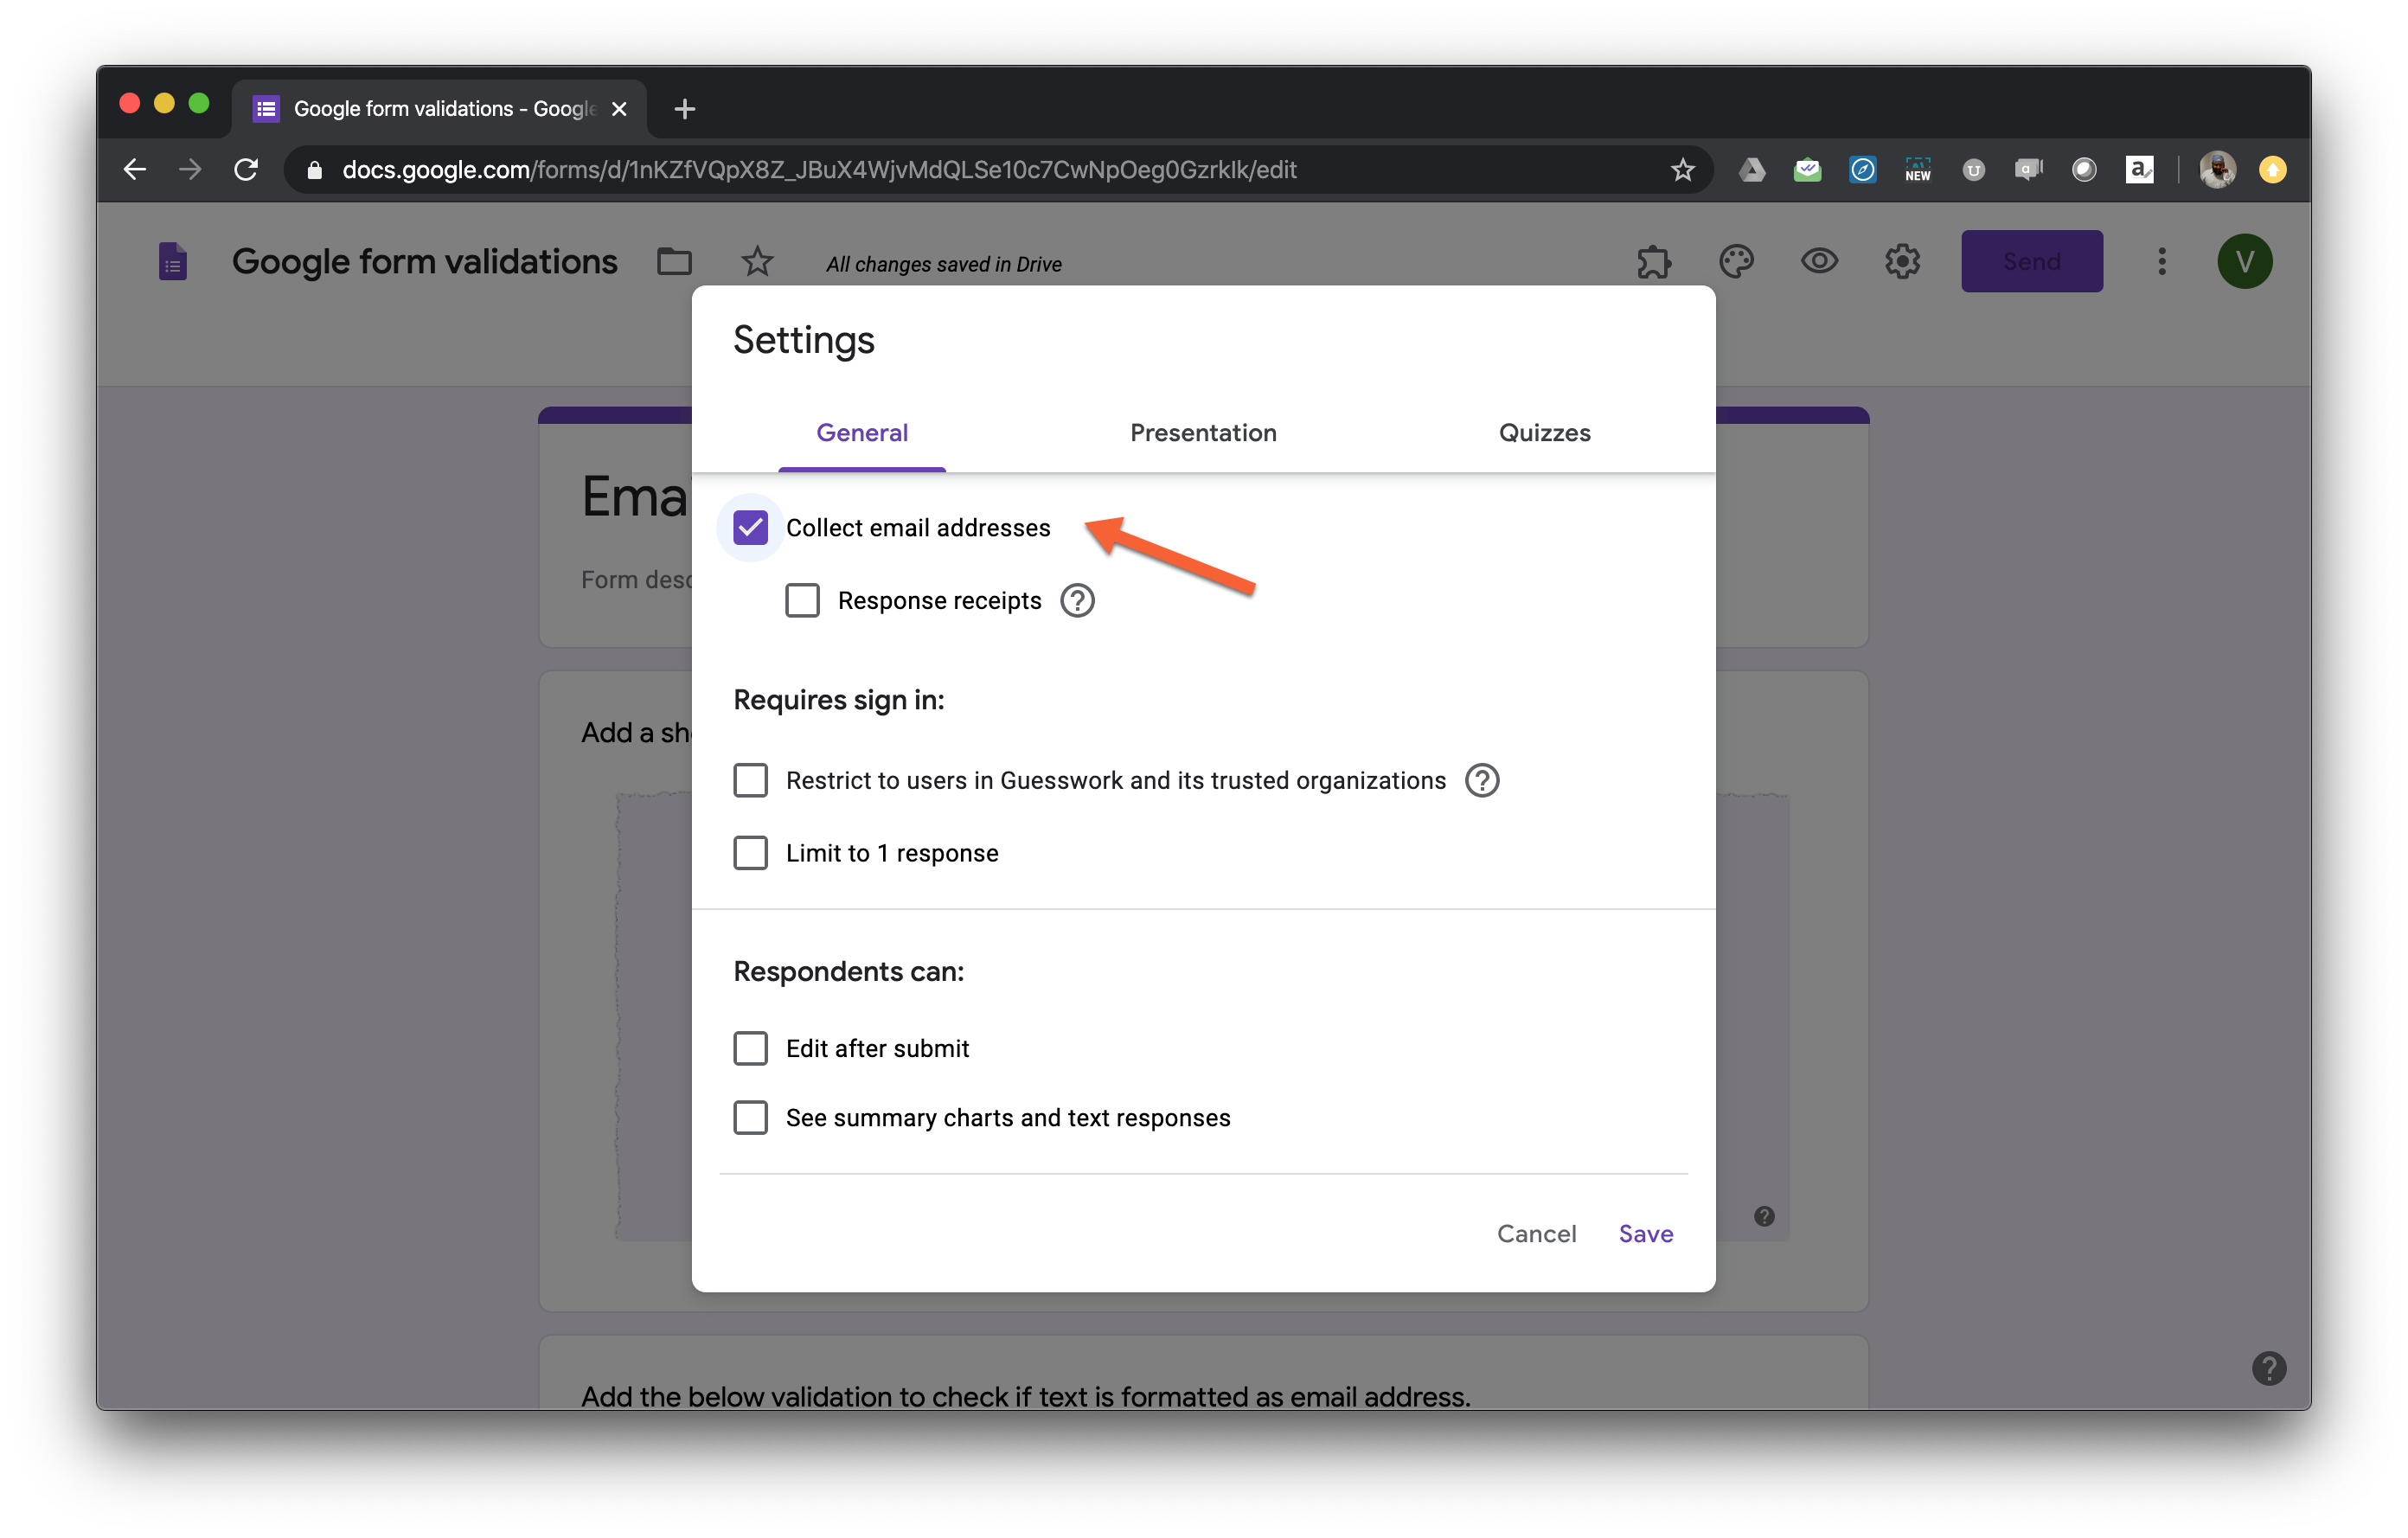 Open your Google Forms and click on the ⚙️ icon next to the SEND button. Settings screen will be displayed. Enable "Collect email addresses" option as shown below.